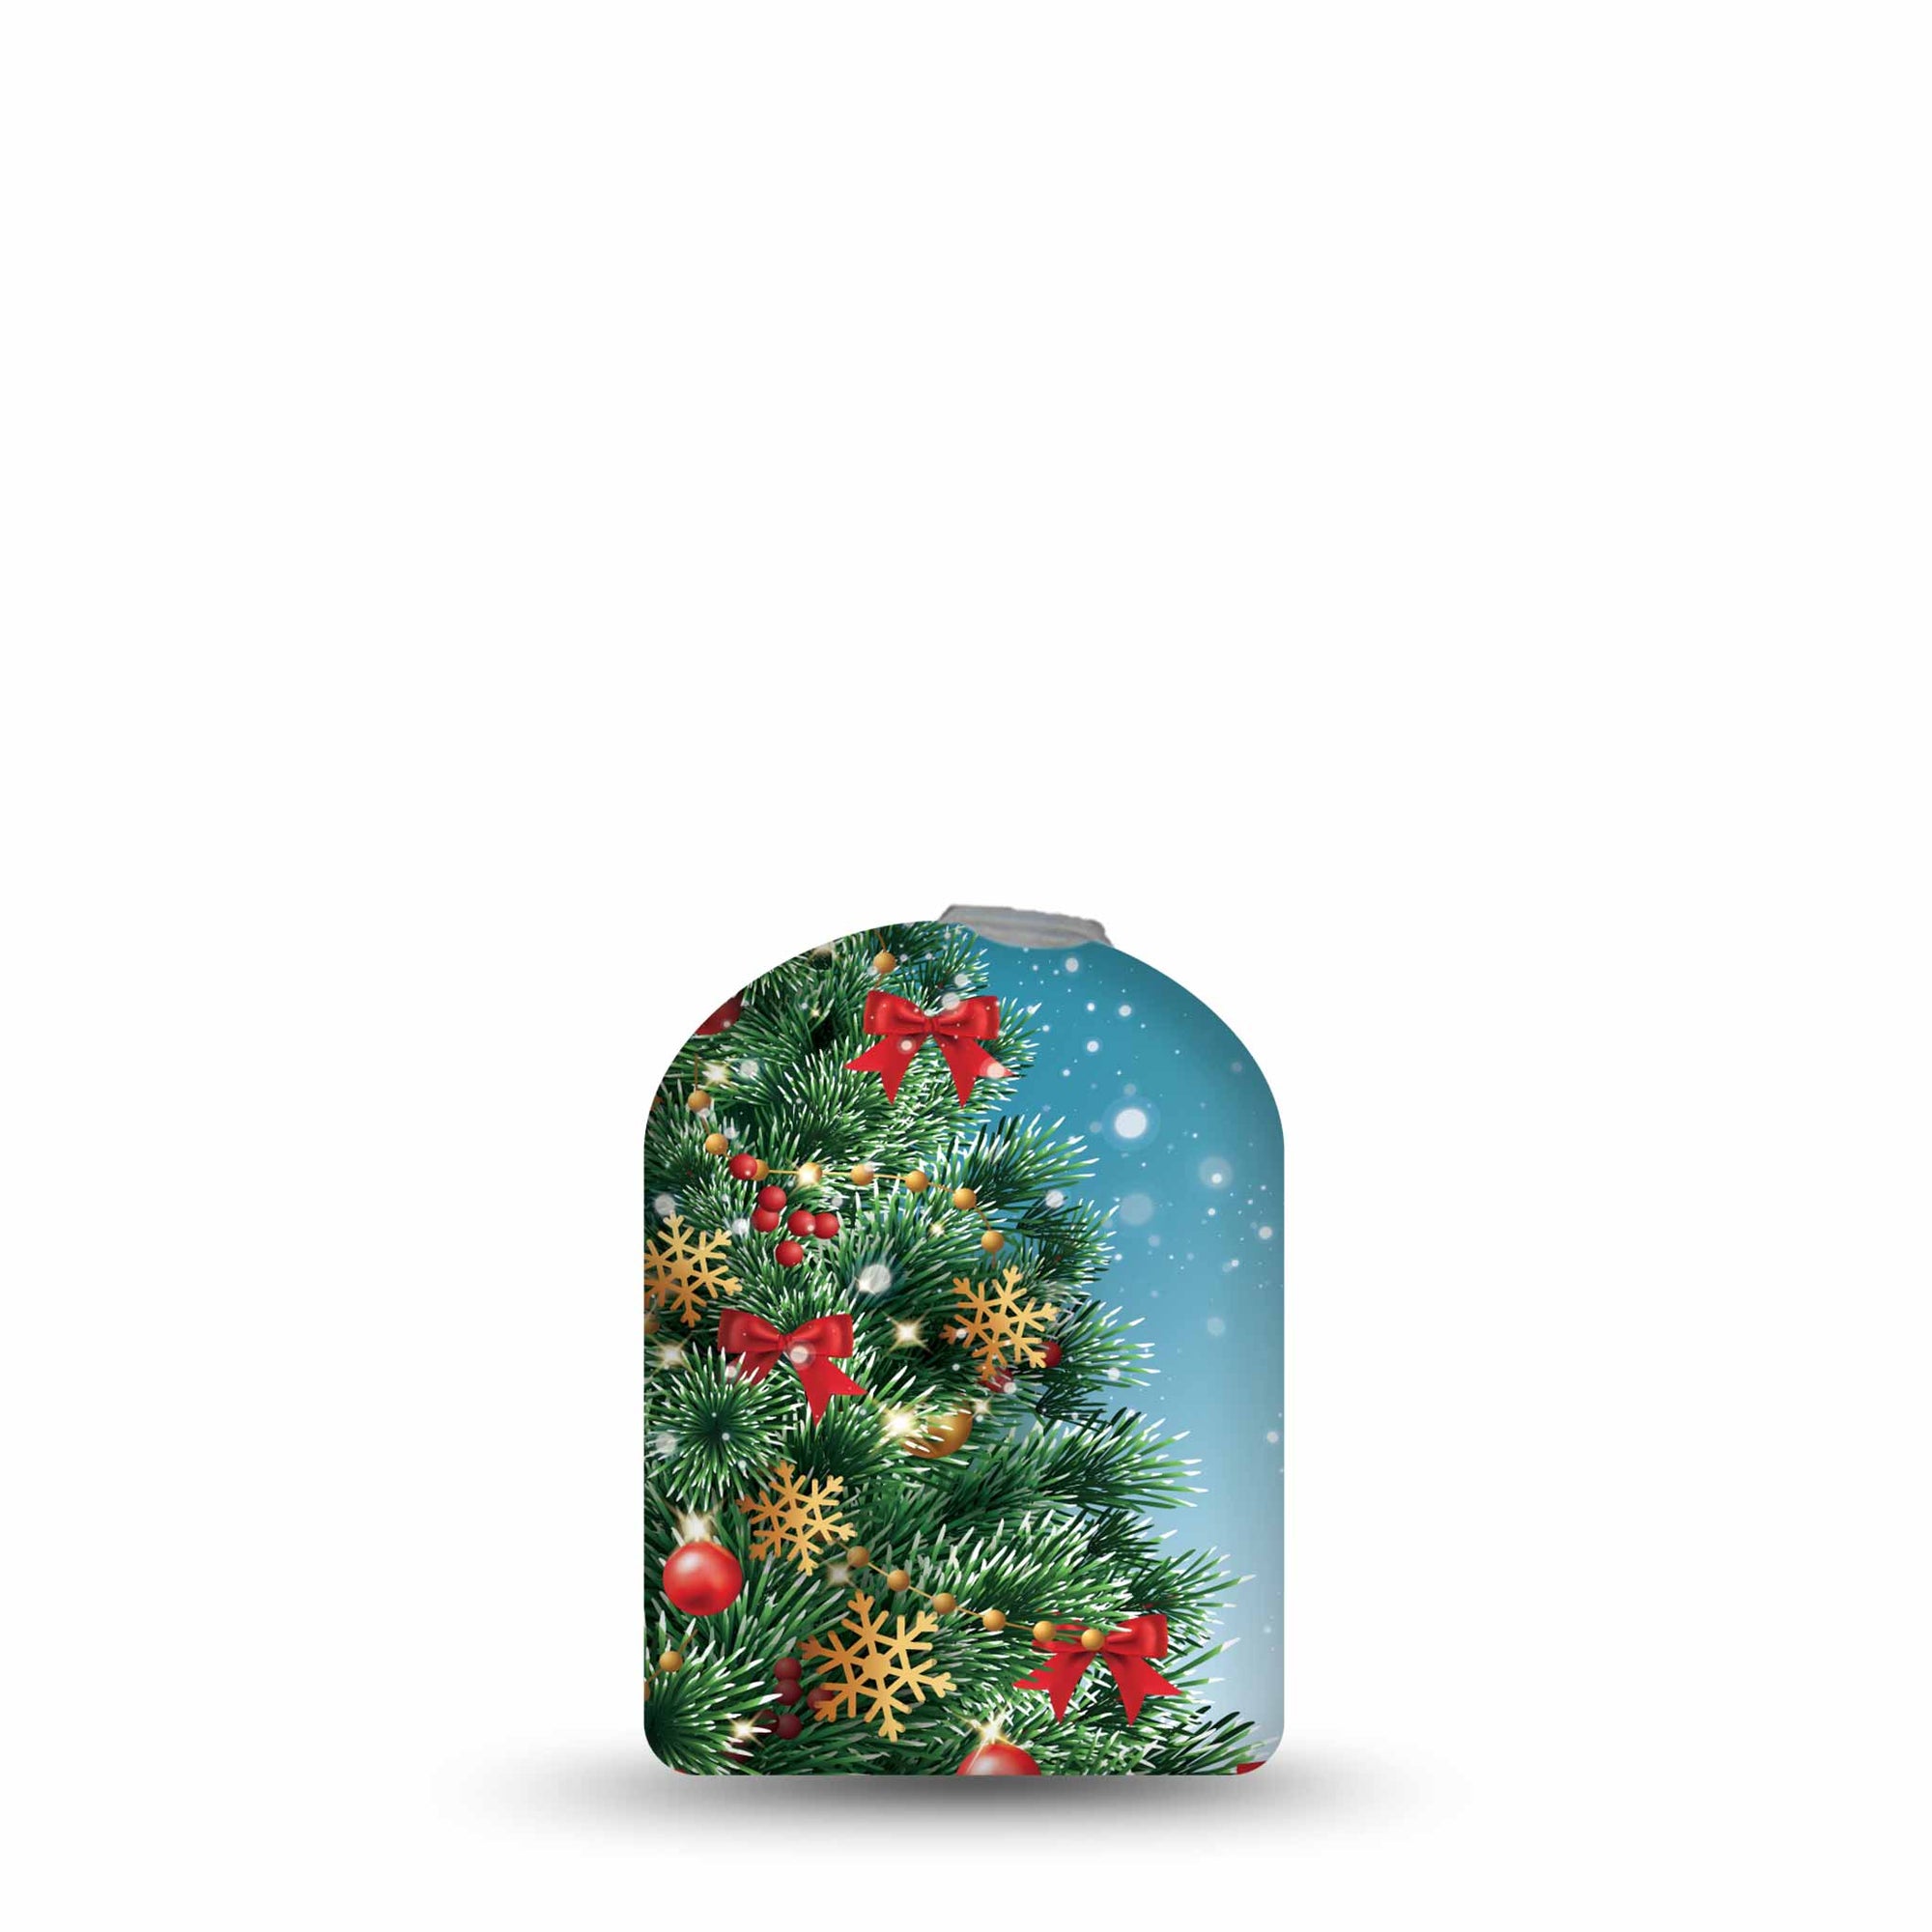 ExpressionMed Oh, Christmas Tree Pod Sticker